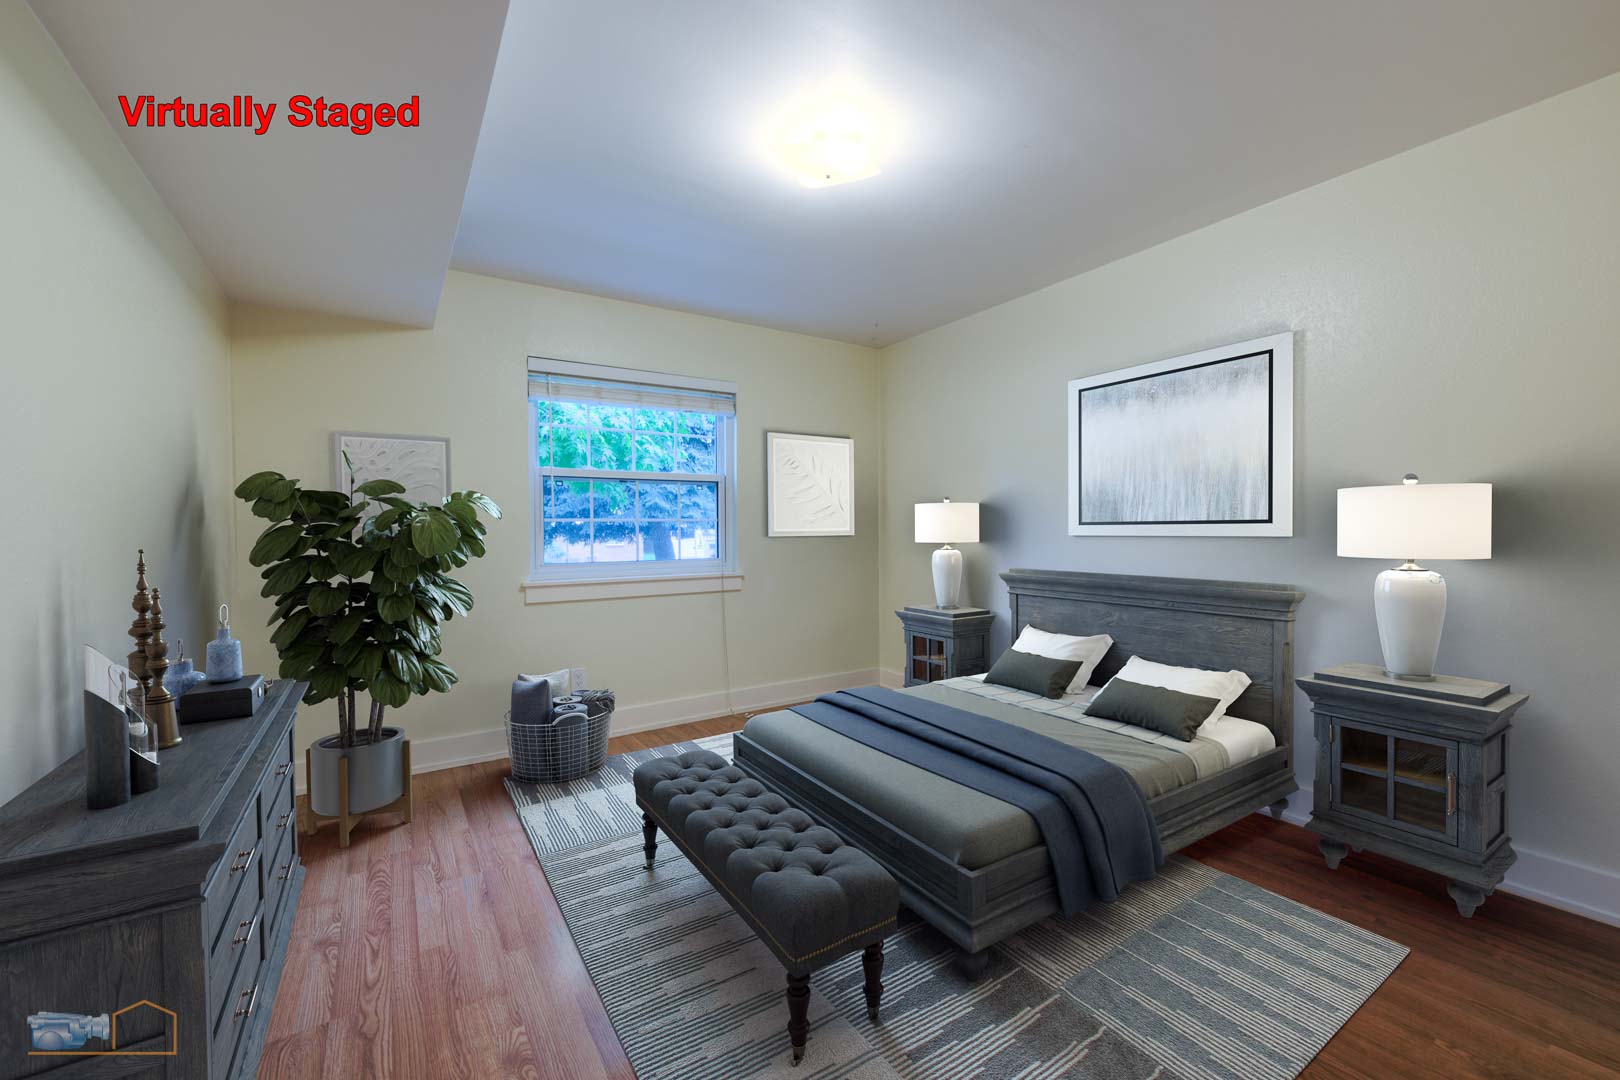 3250 B14 12a Primary Bedroom1 5TMDE RVT3 AD 01 08 23 23 41 Print Web - Virtual Staging